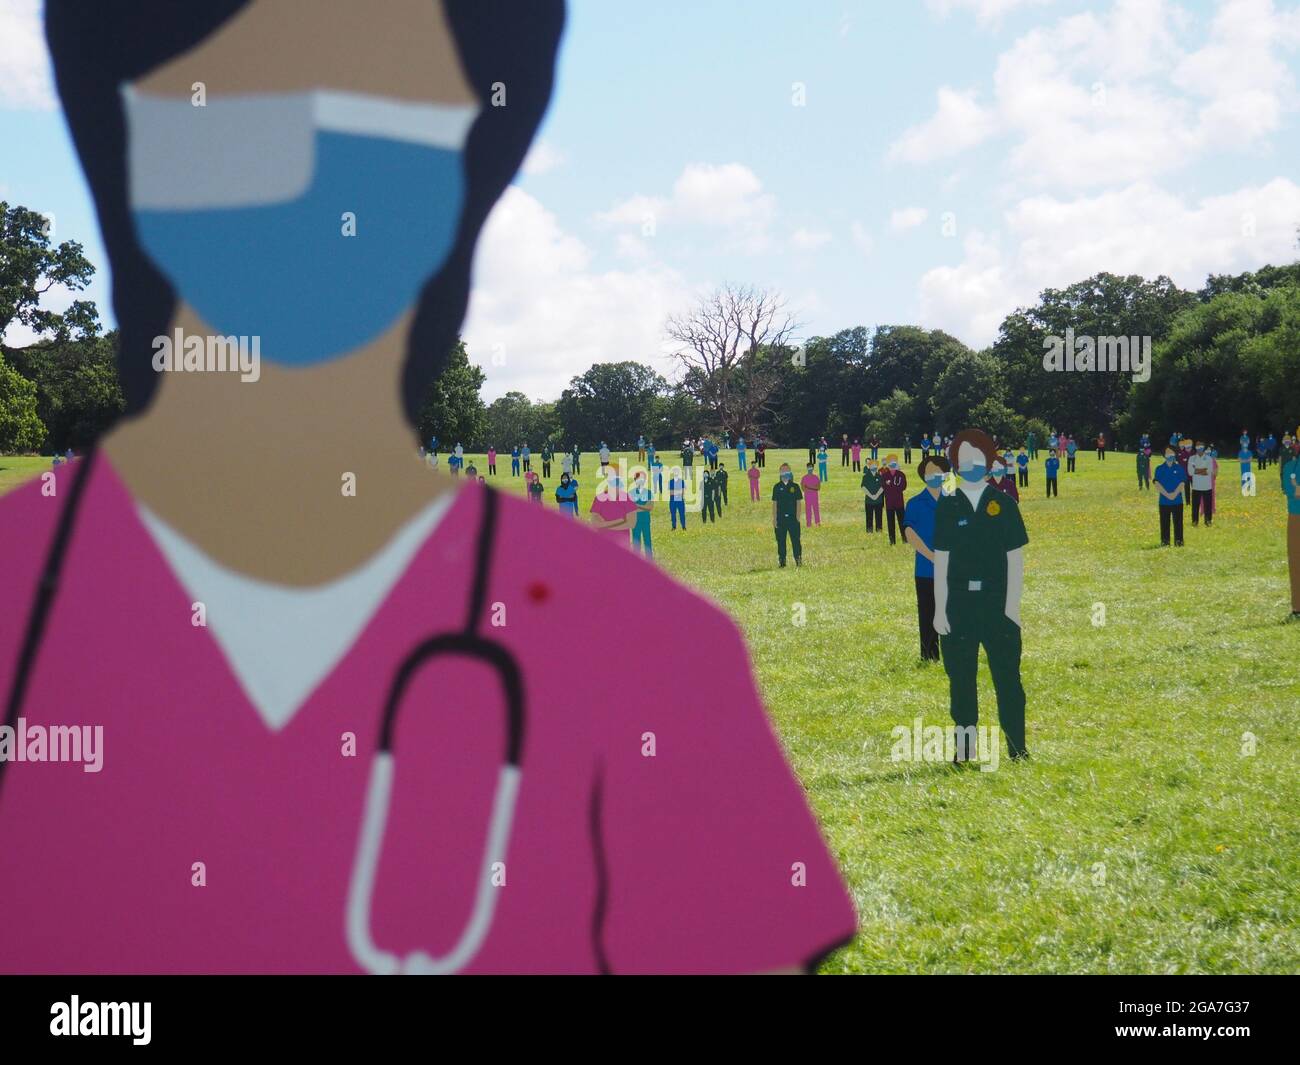 Oxford, UK. 29th July 2021. The Standing with Giants community art installation in South Park in tribute to the NHS workers who lost their lives while fighting Covid-19. Credit: Angela Swann/Alamy Live News Stock Photo